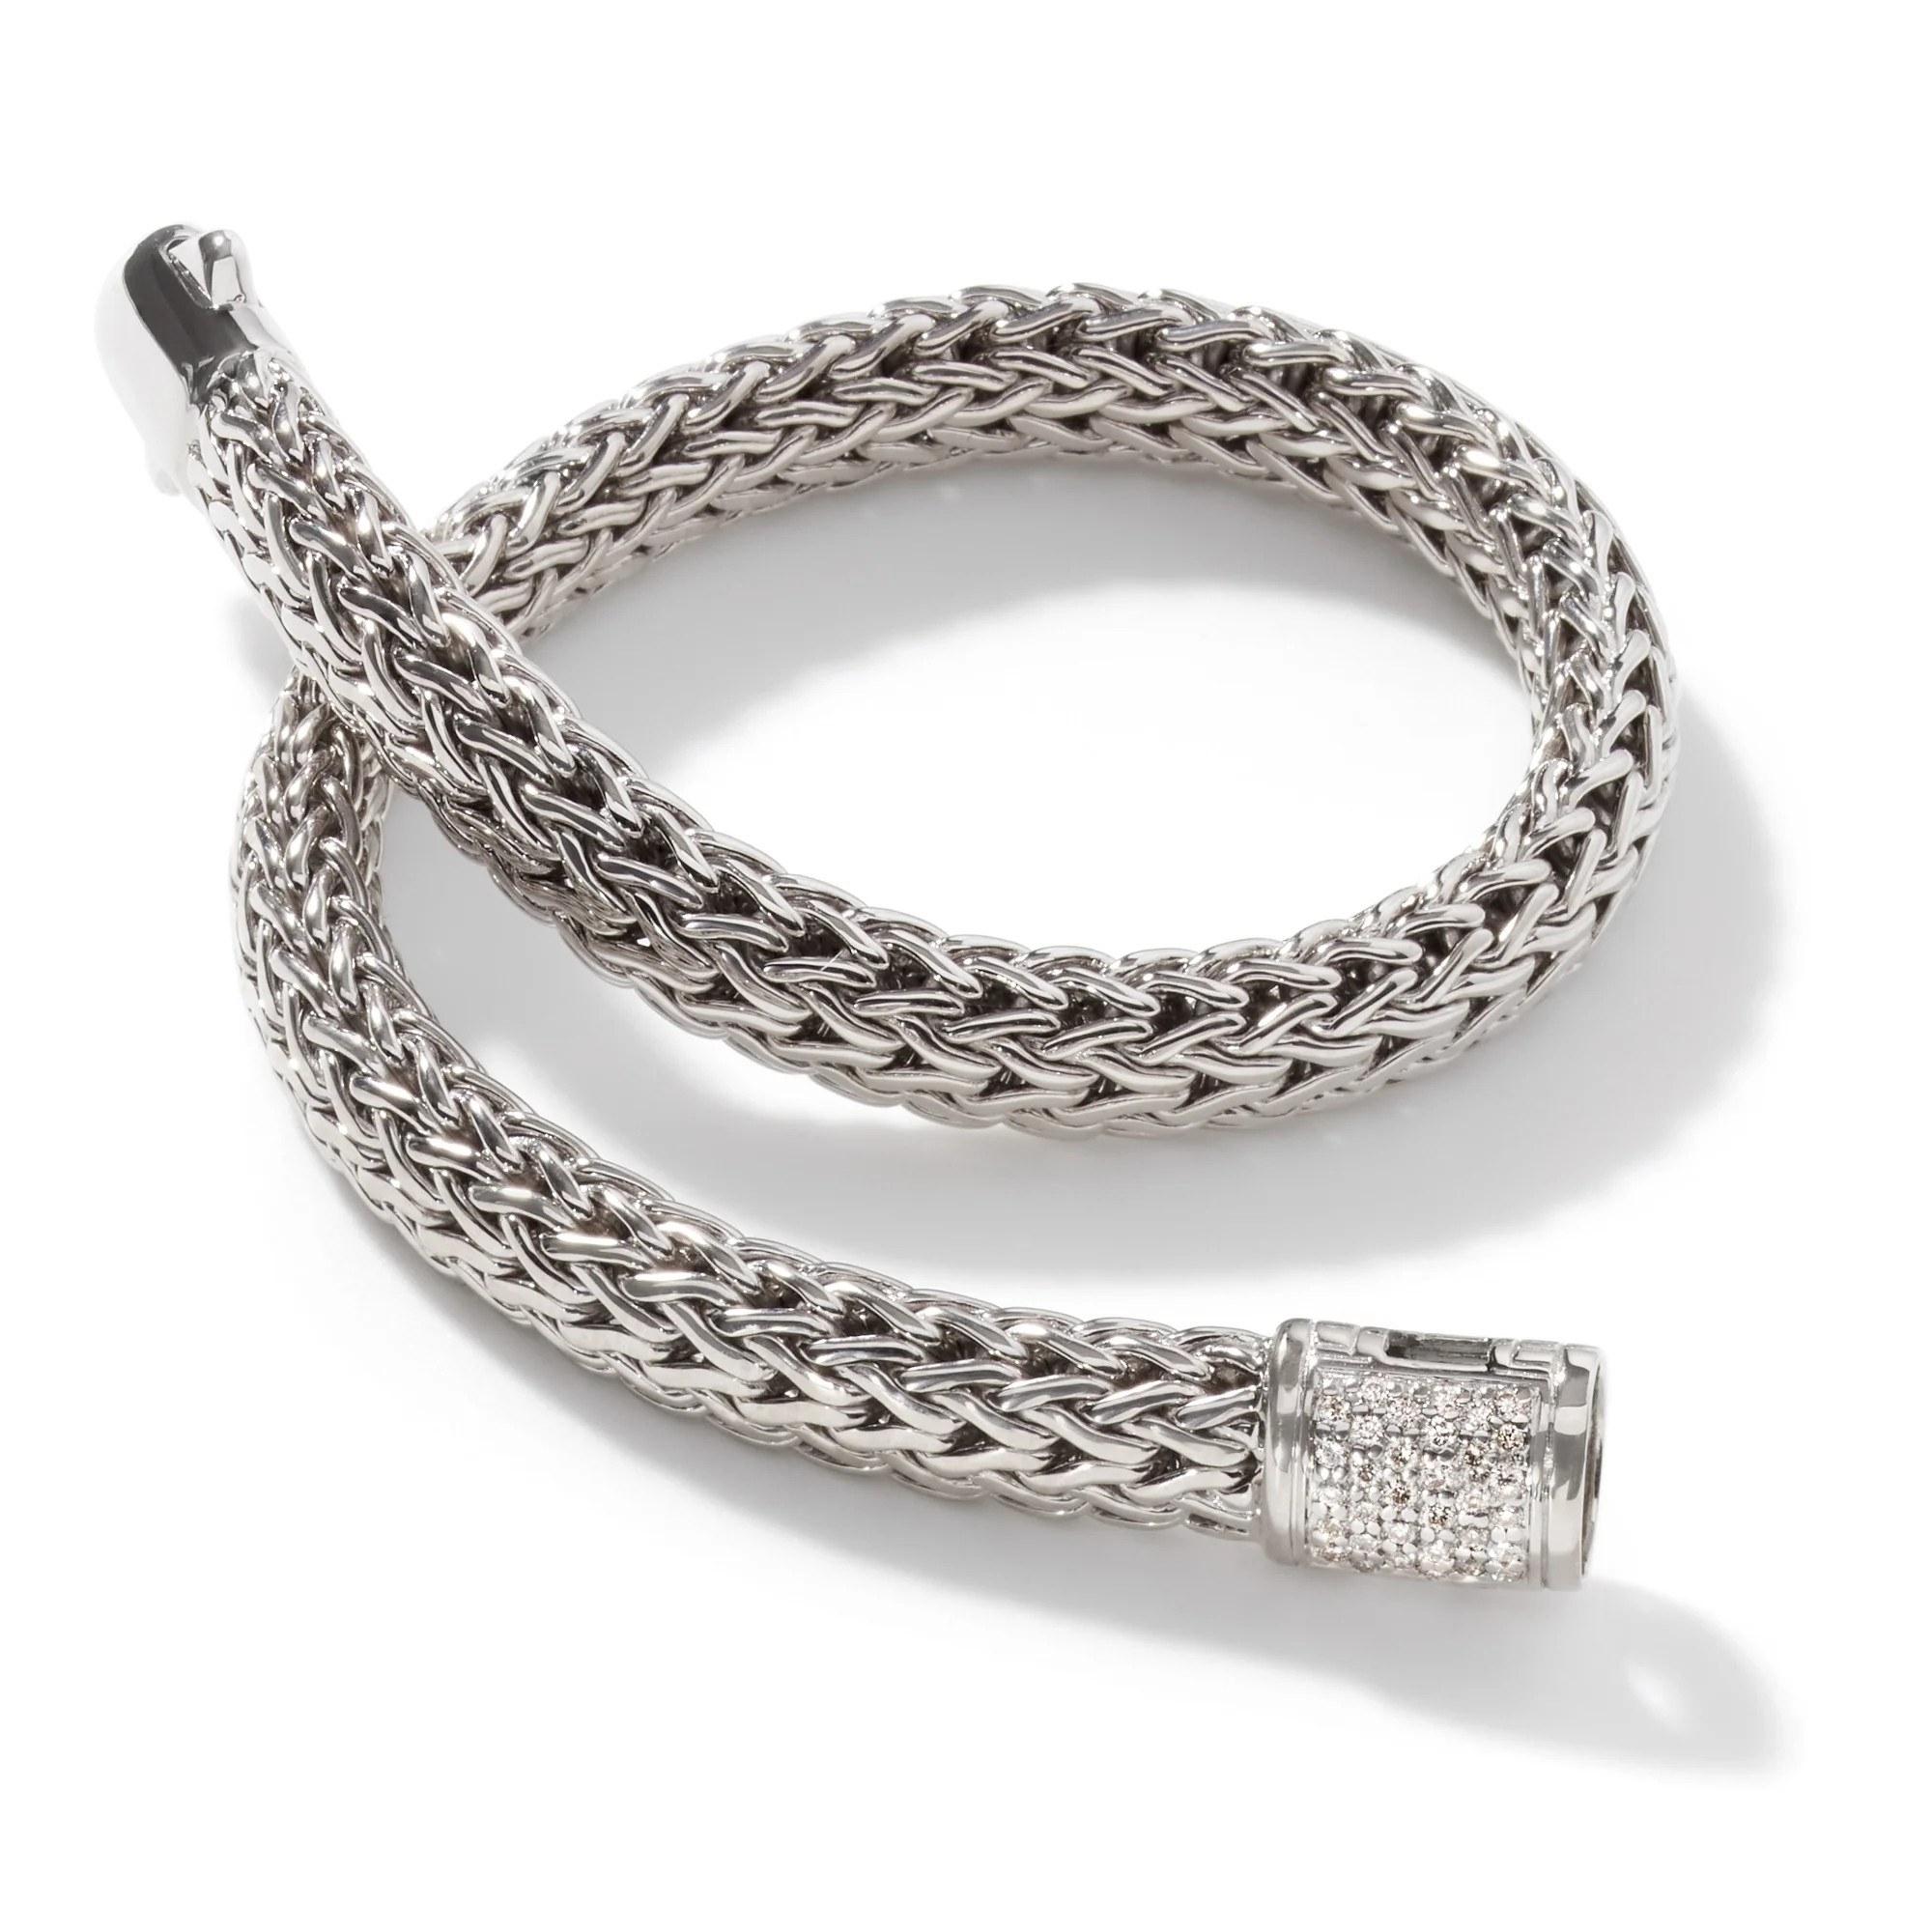 John Hardy Small Woven Chain Bracelet with Diamond Accents 2